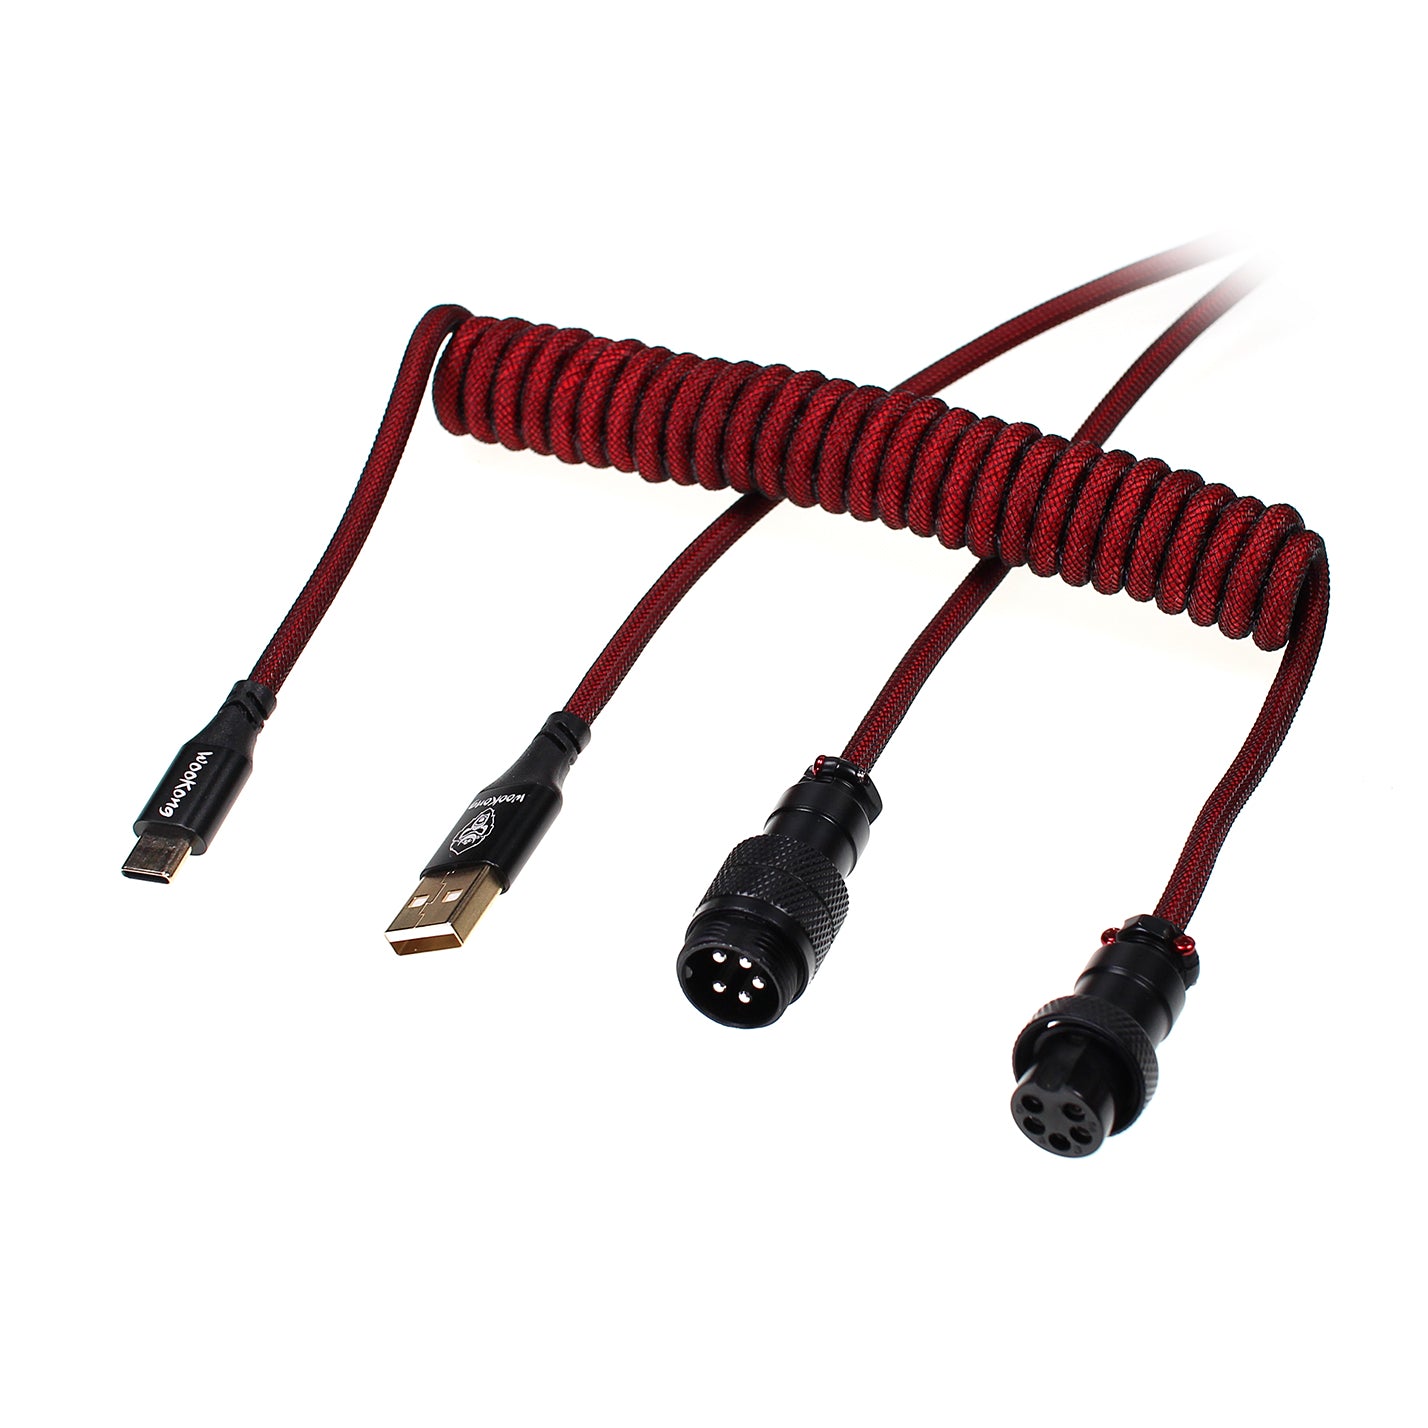 Wookong Aviator Coiled USB Cables for Keyboards - (Red / Black)